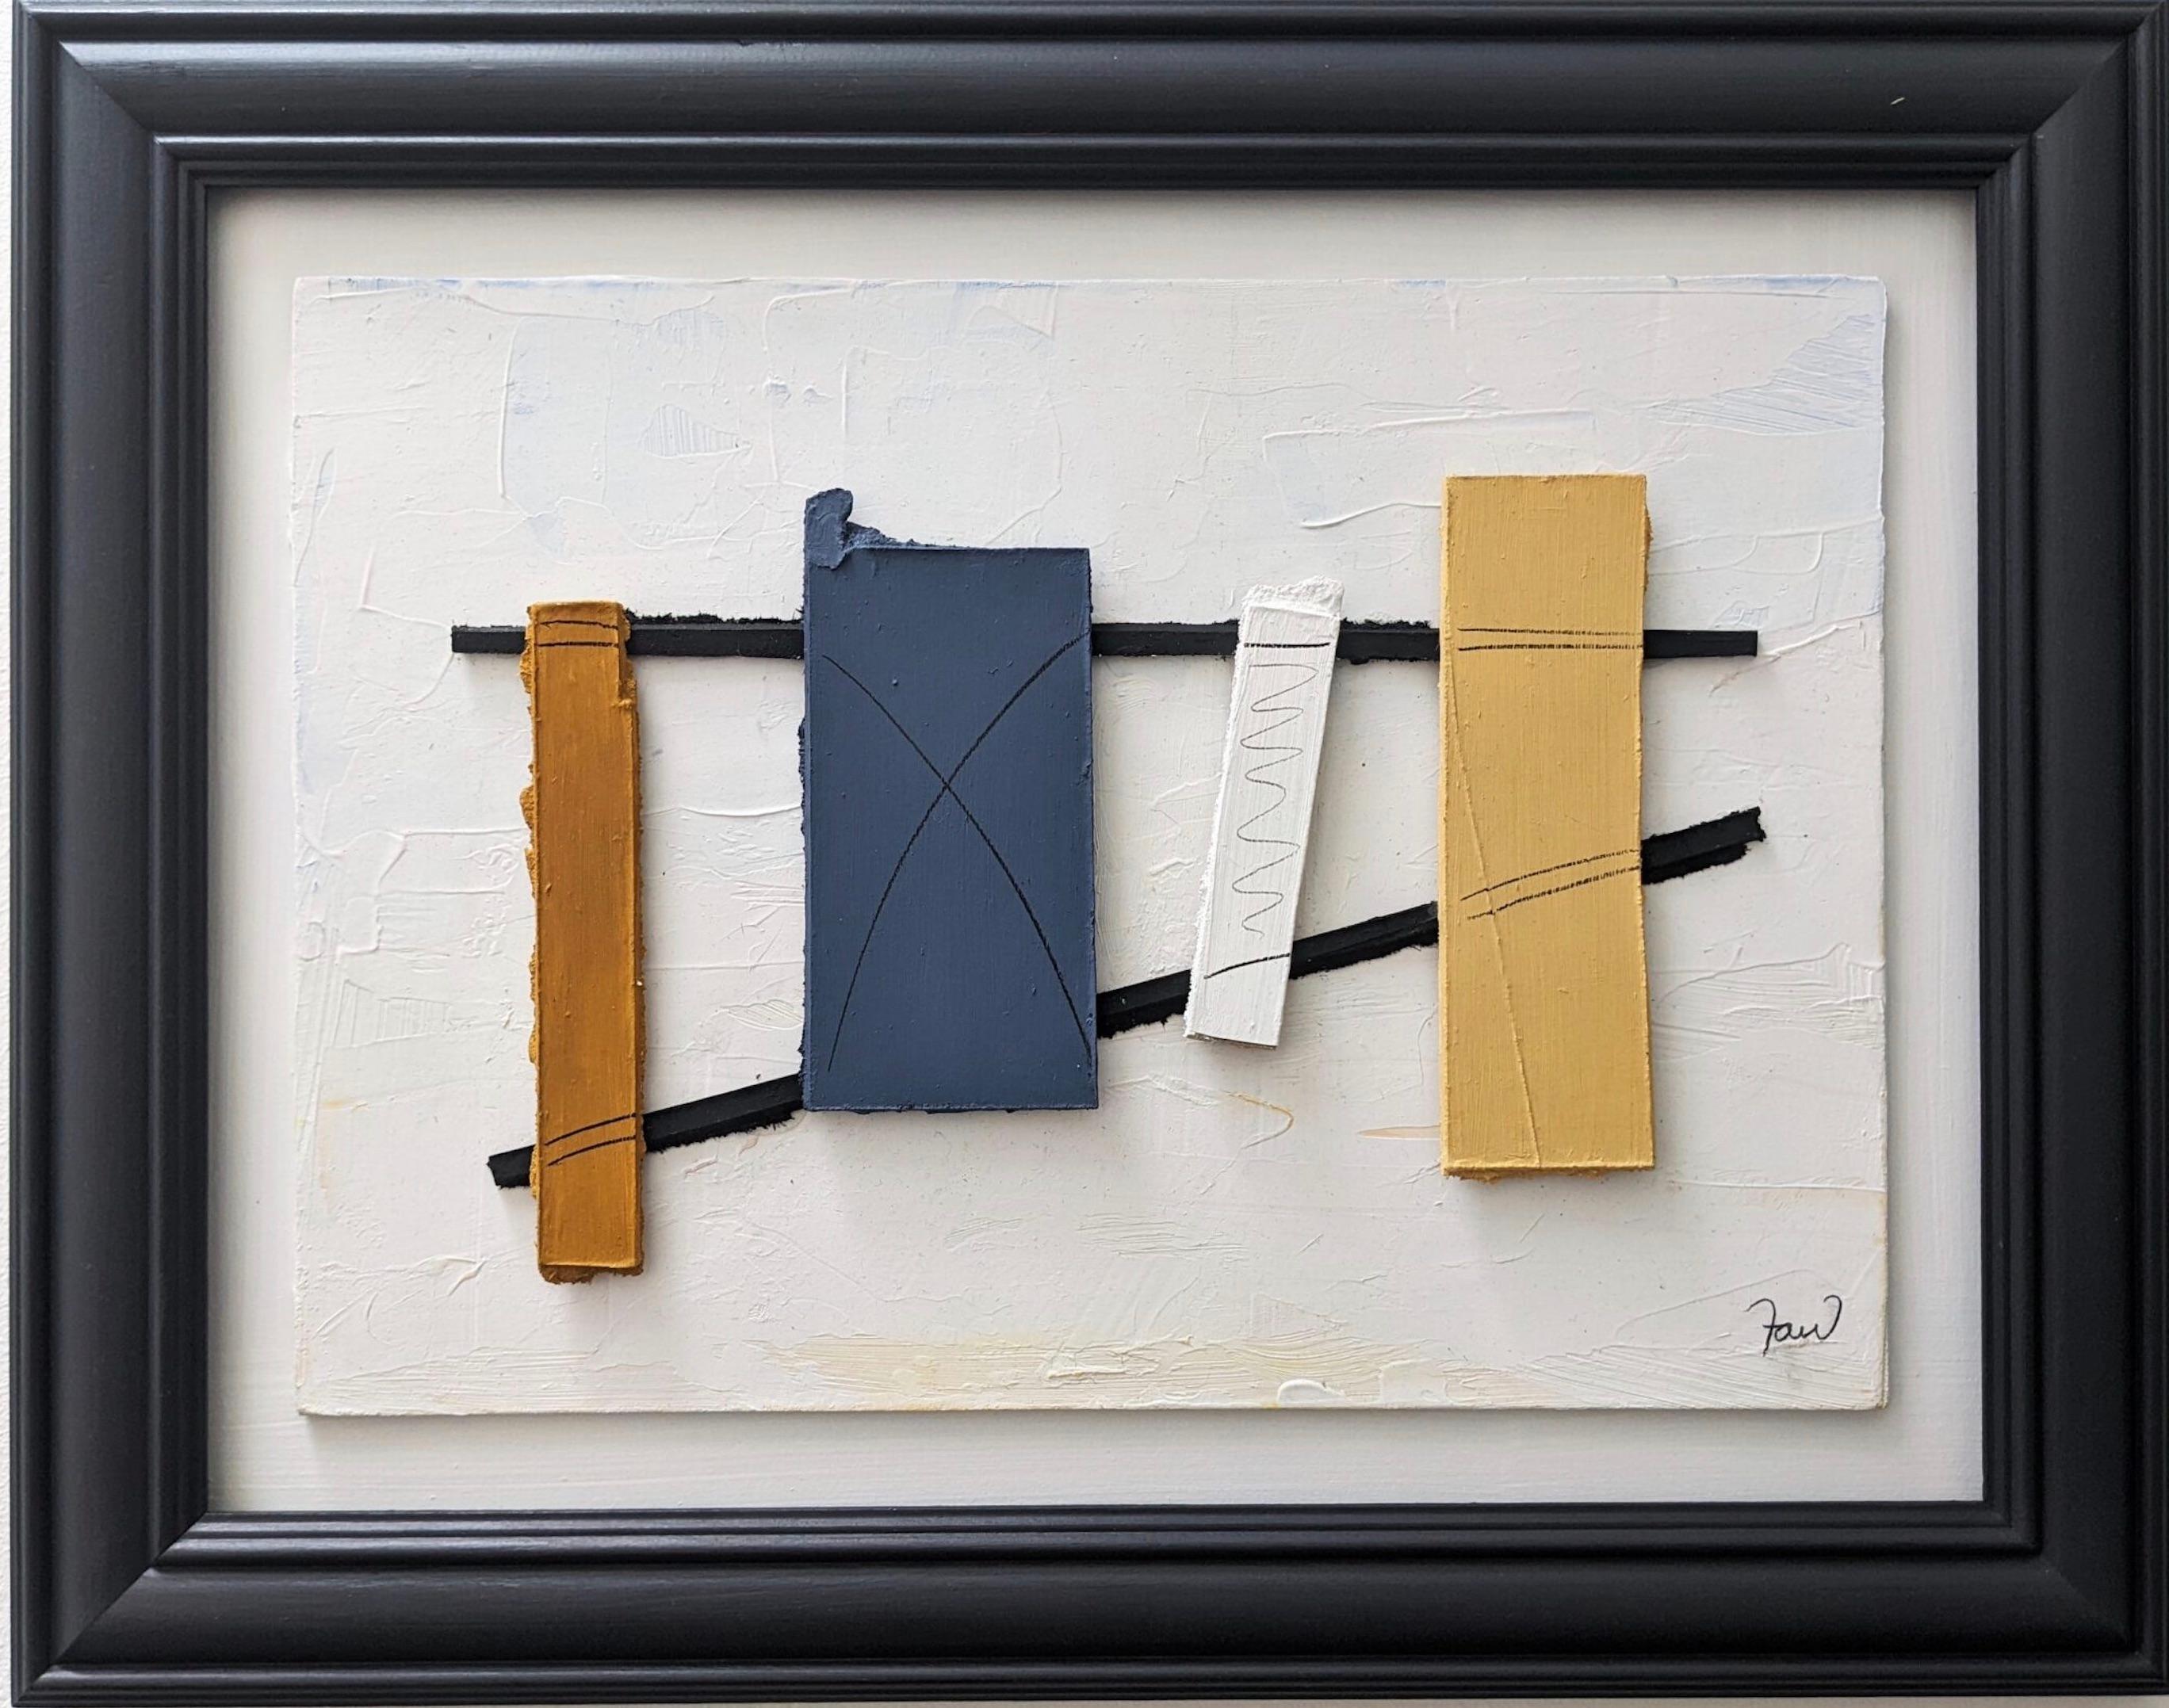 Unknown Abstract Painting - Contemporary Constructivist Oil Relief Painting Framed - Construction 2